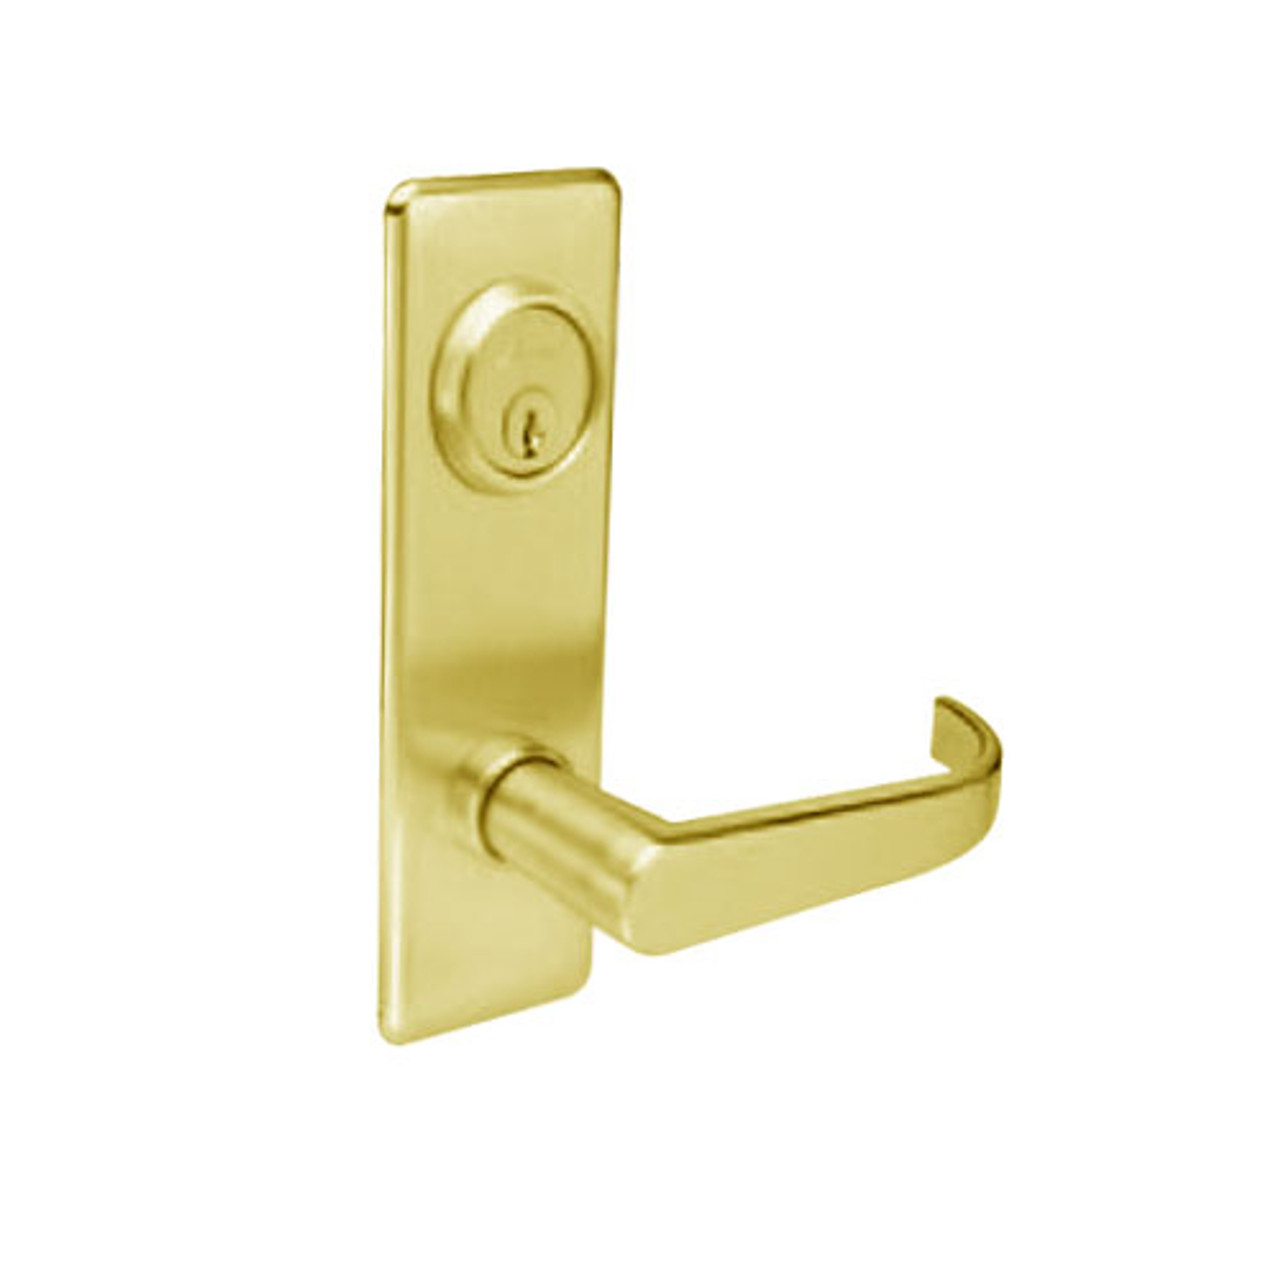 BM07-BRG-03 Arrow Mortise Lock BM Series Exit Lever with Broadway Design and G Escutcheon in Bright Brass